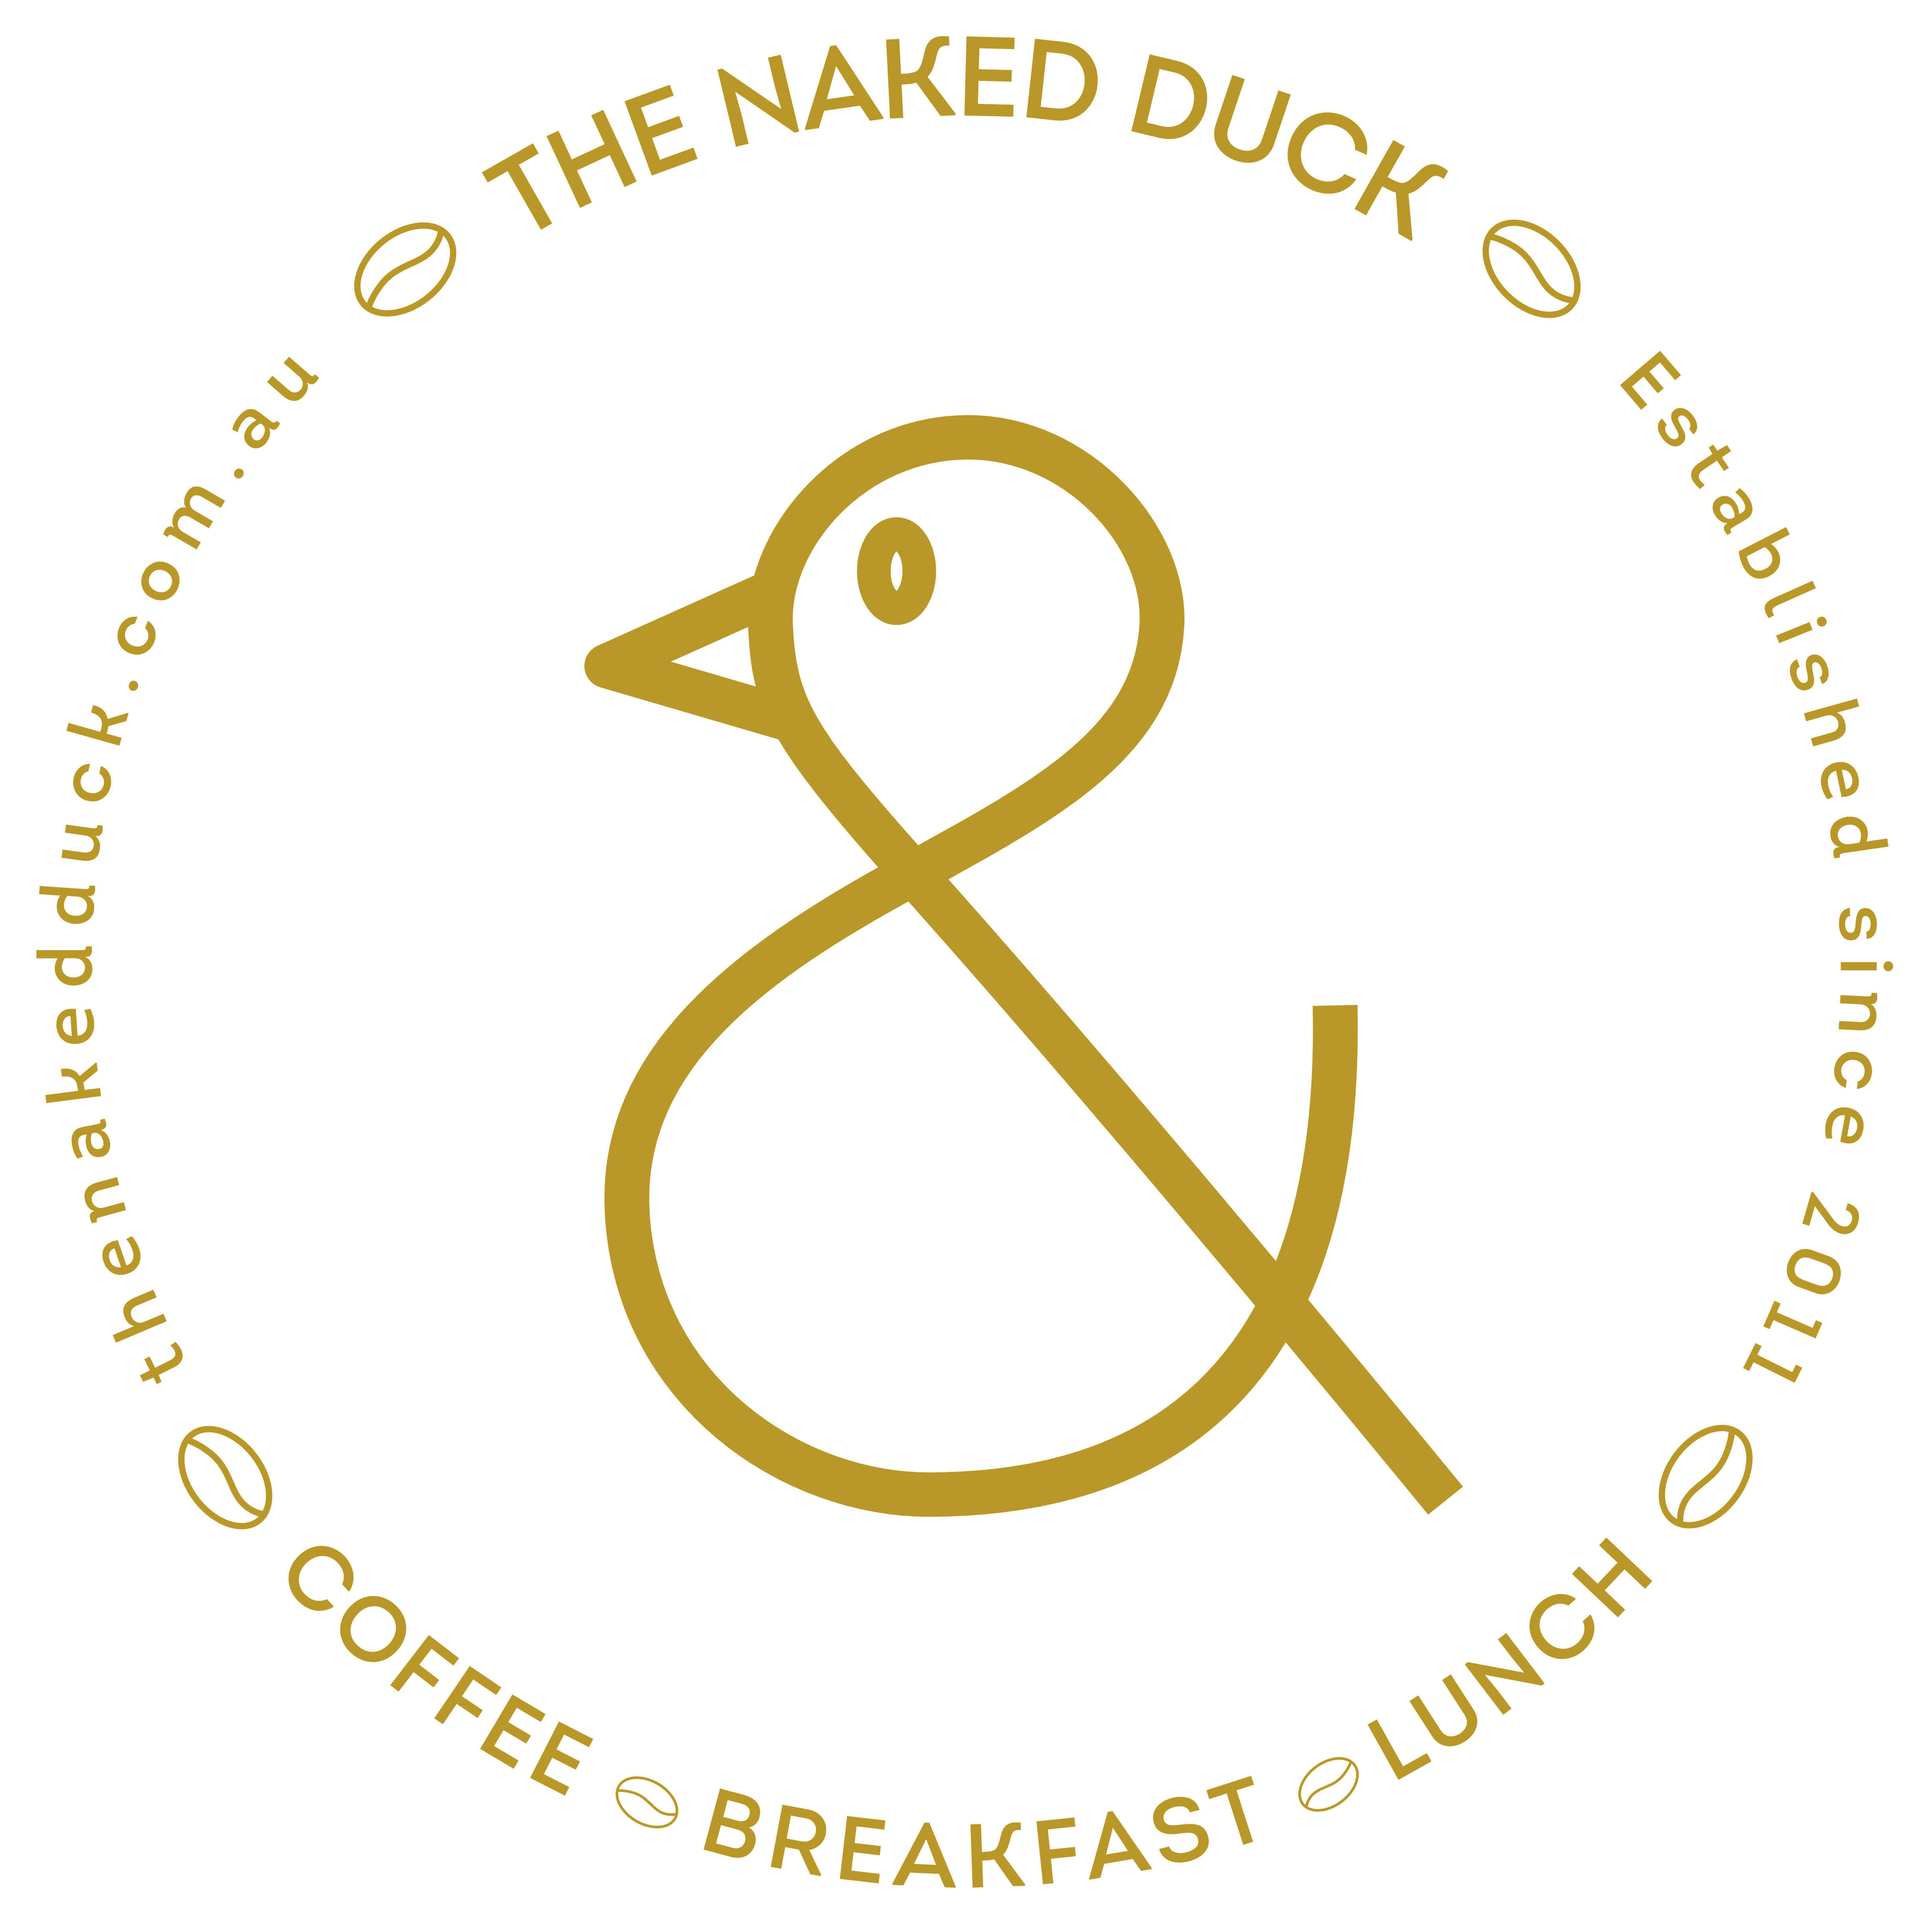 The Naked Duck logo